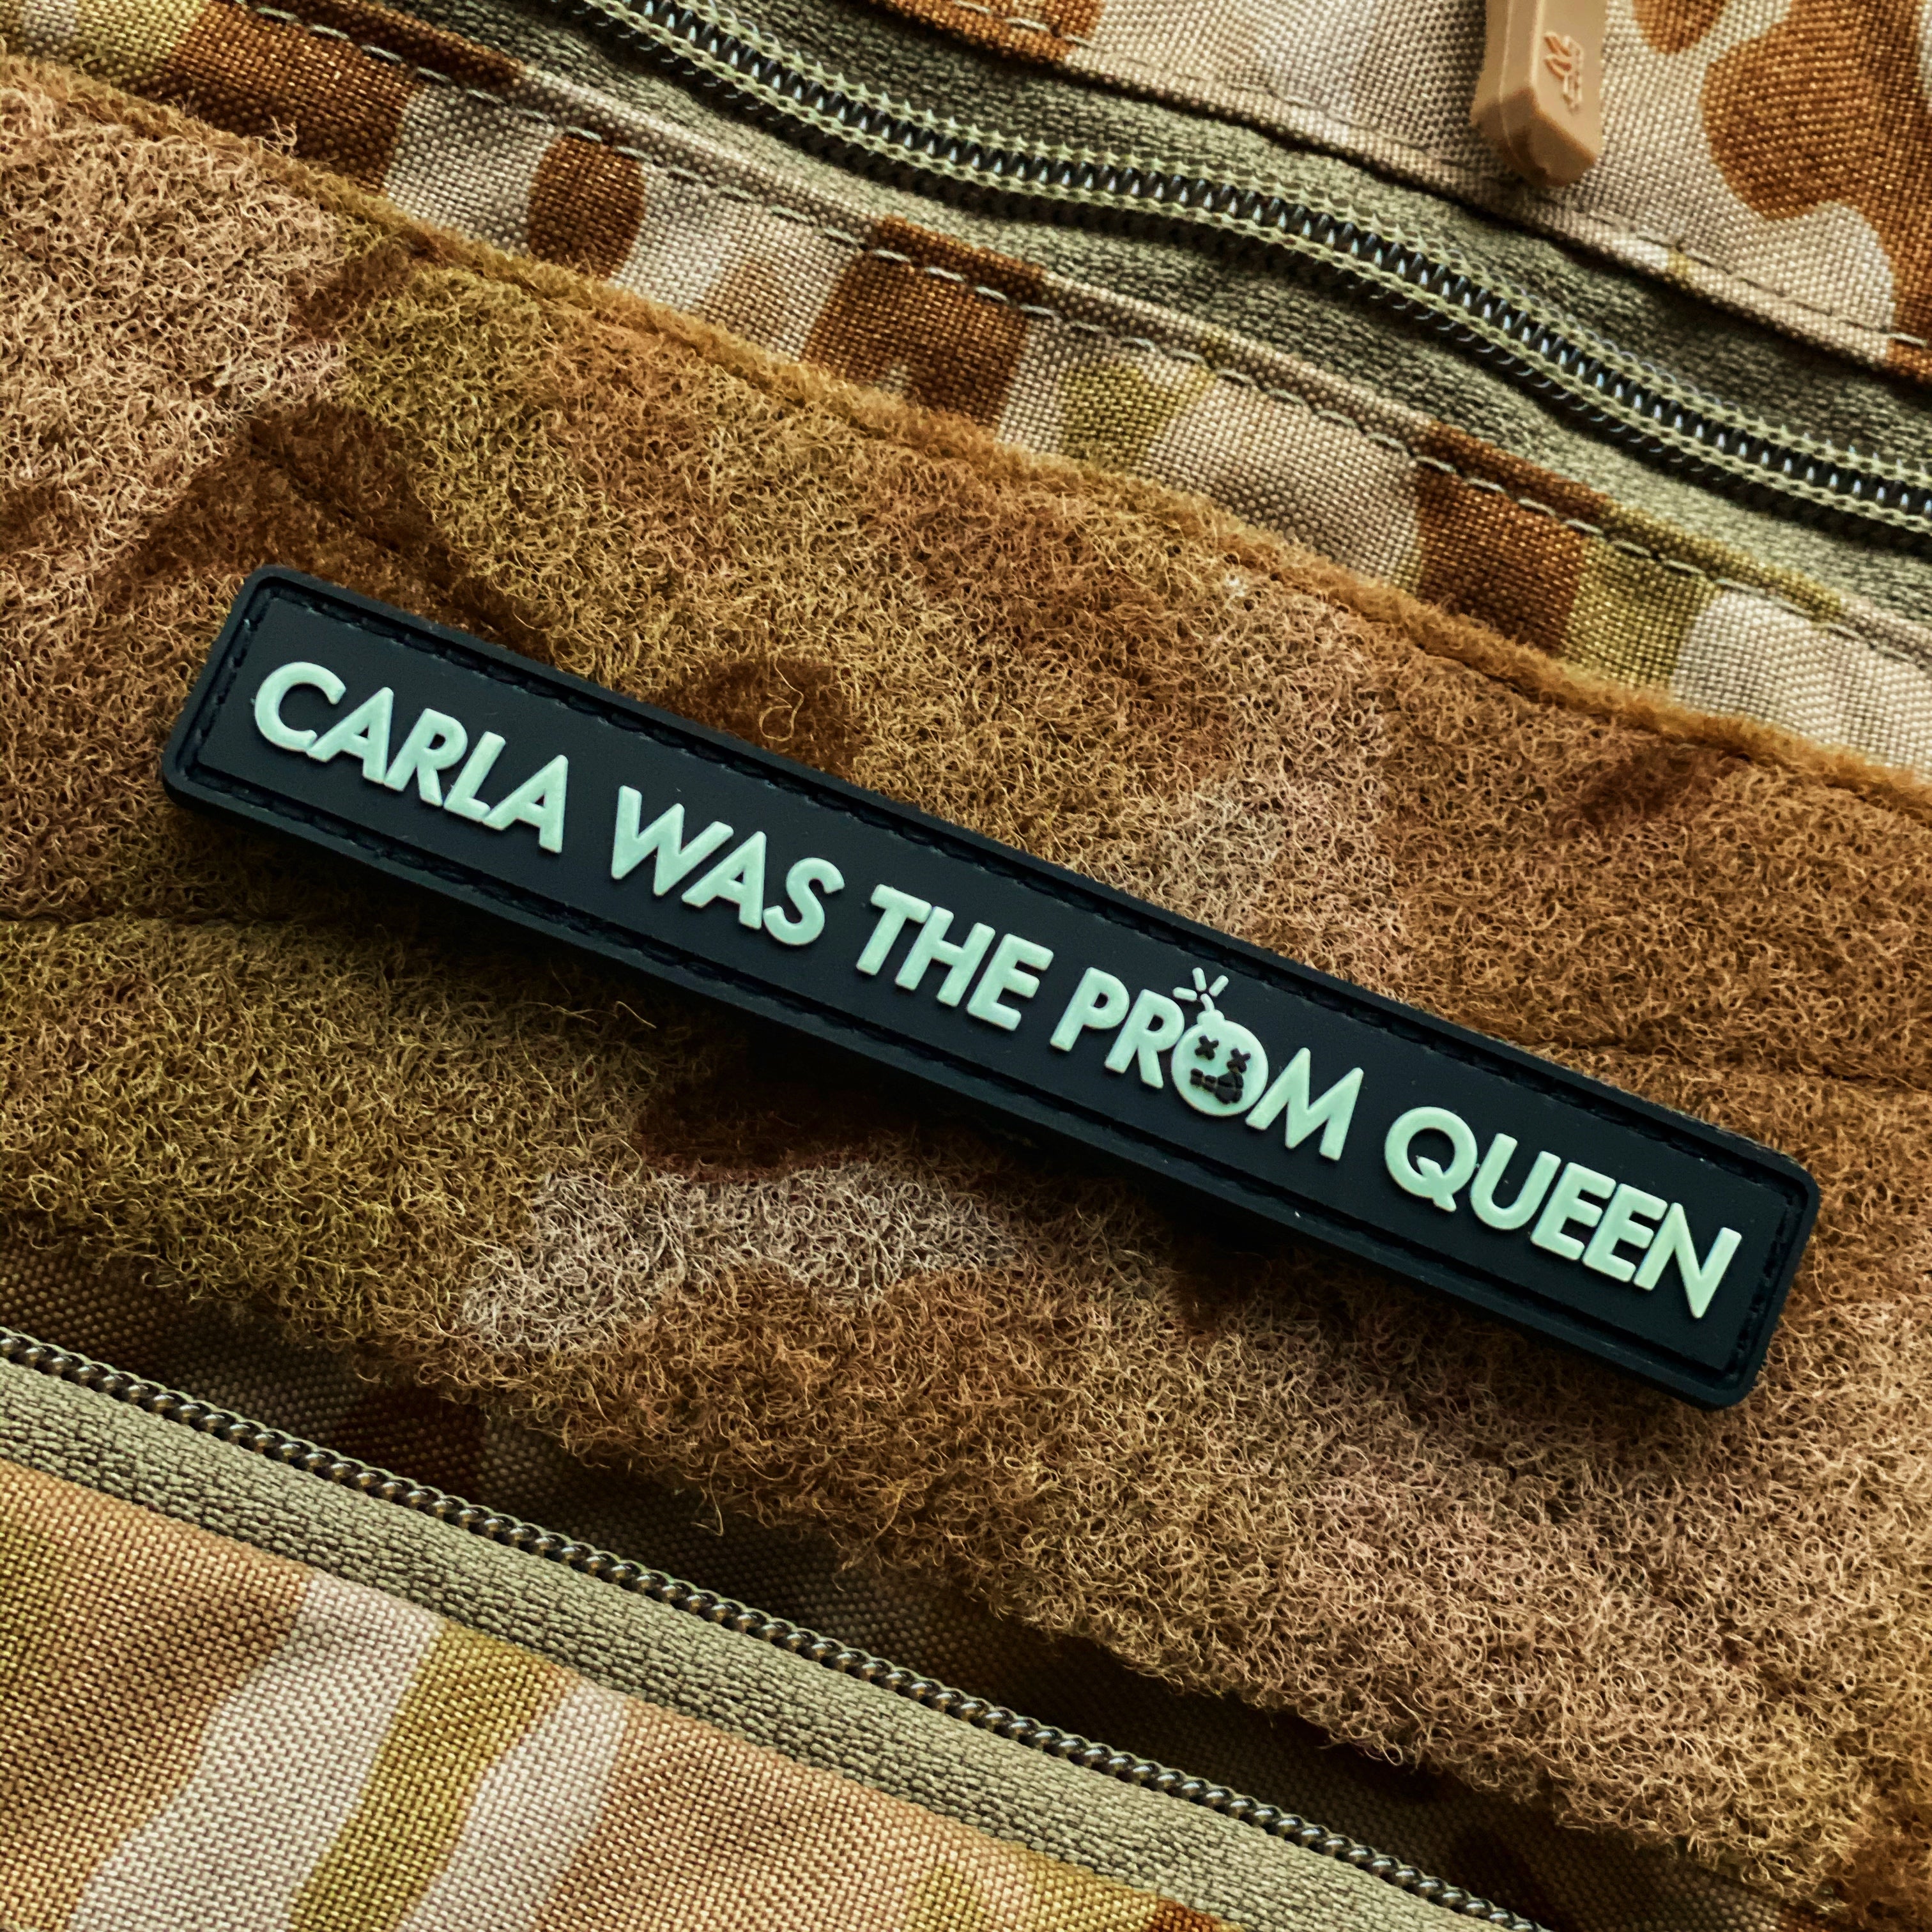 🔥 NEW 🔥 Dangerous Goods™️ The Rock “Carla Was The Prom Queen” Morale Patch